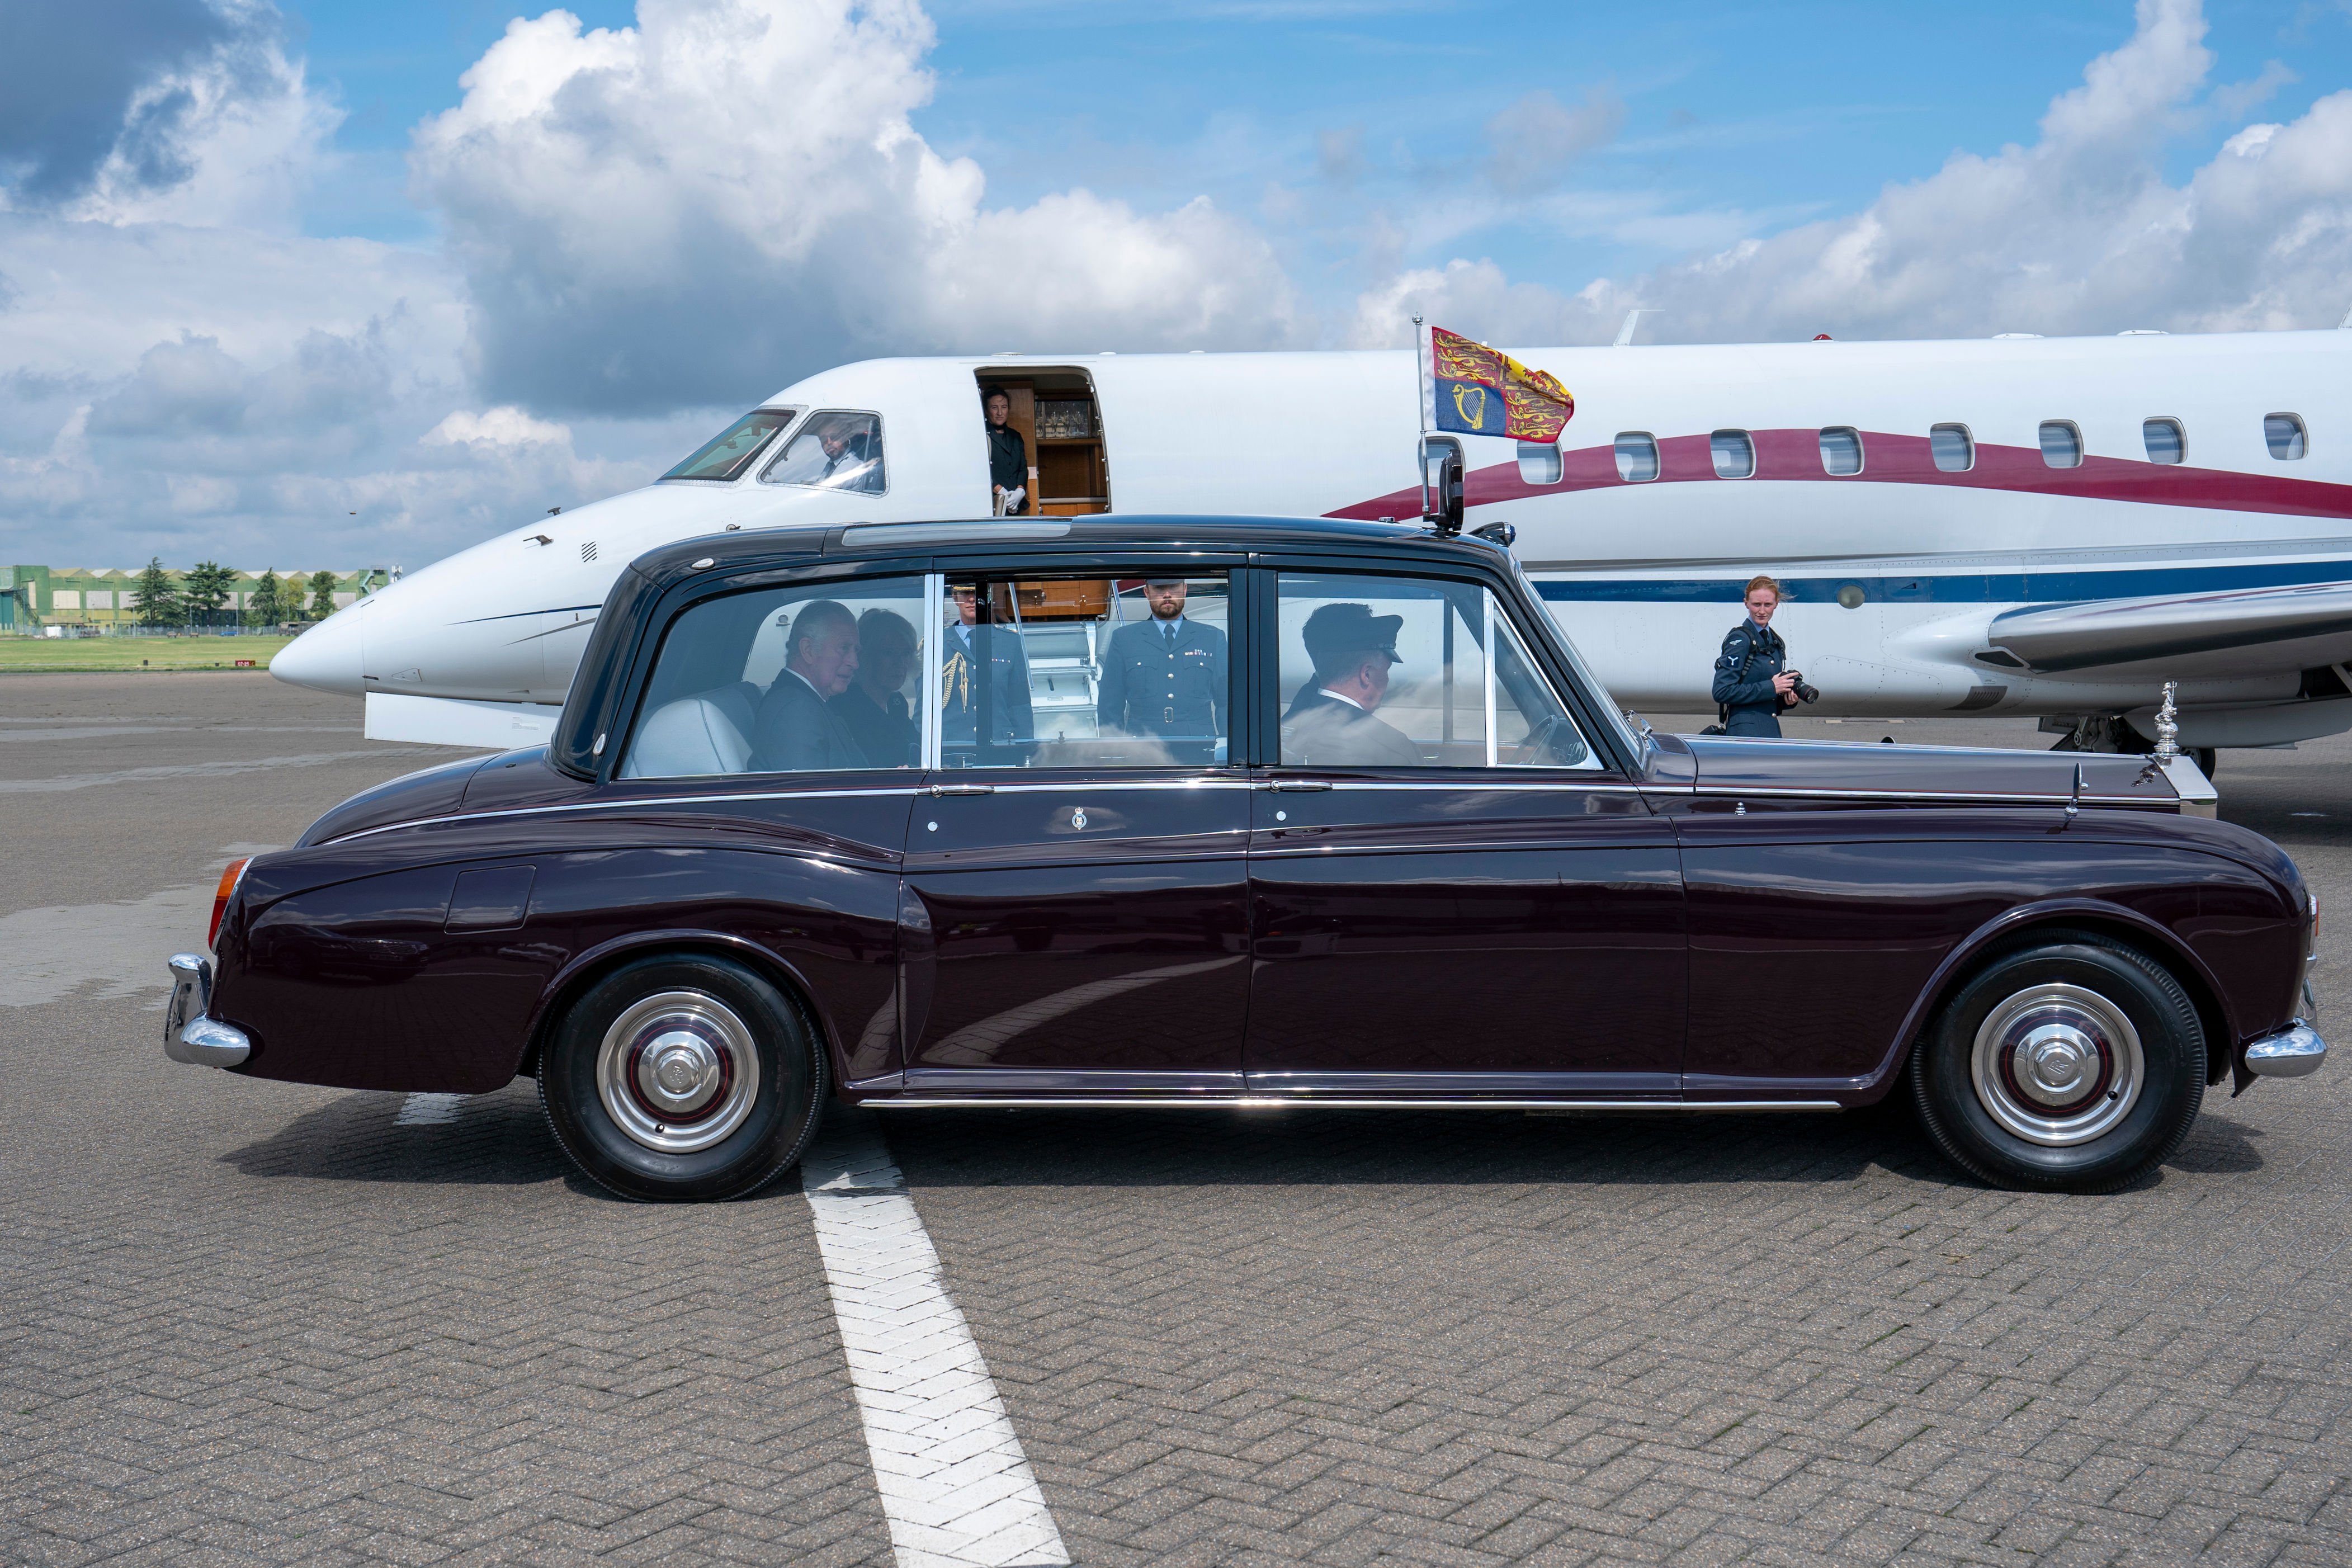 <p>King Charles III and Camilla, Queen Consort were photographed in a chauffeured car flying the Royal Standard -- the flag of Britain's sovereign -- after landing at RAF Northolt, a military and civilian airport outside London, on Sept. 9, 2022, as they returned to the capital from Scotland the morning after Queen Elizabeth II's <a href="https://www.wonderwall.com/celebrity/celebrities-dignitaries-react-to-death-of-queen-elizabeth-ii-647756.gallery">death</a>. It marked their first time in England as king and queen. </p>